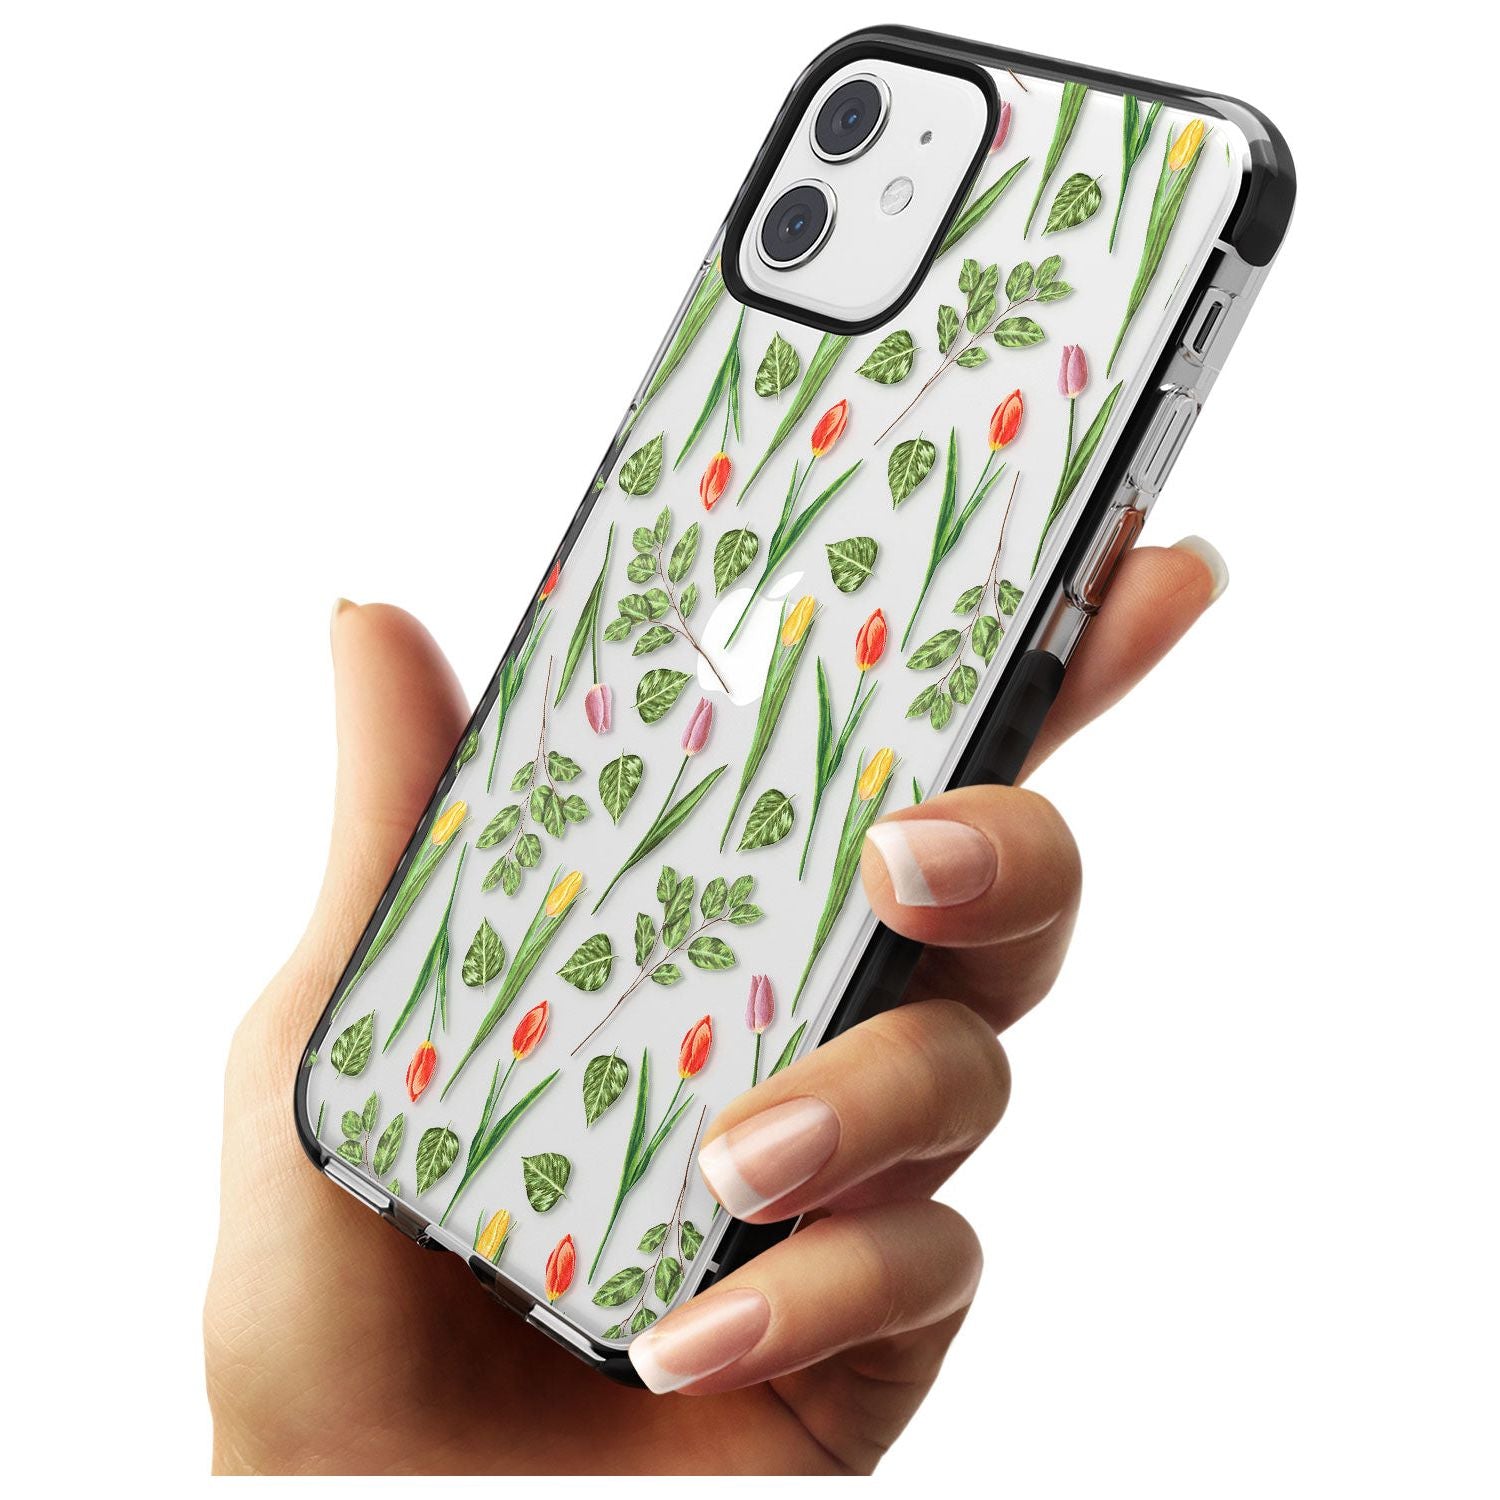 Spring Tulips Transparent Floral Black Impact Phone Case for iPhone 11